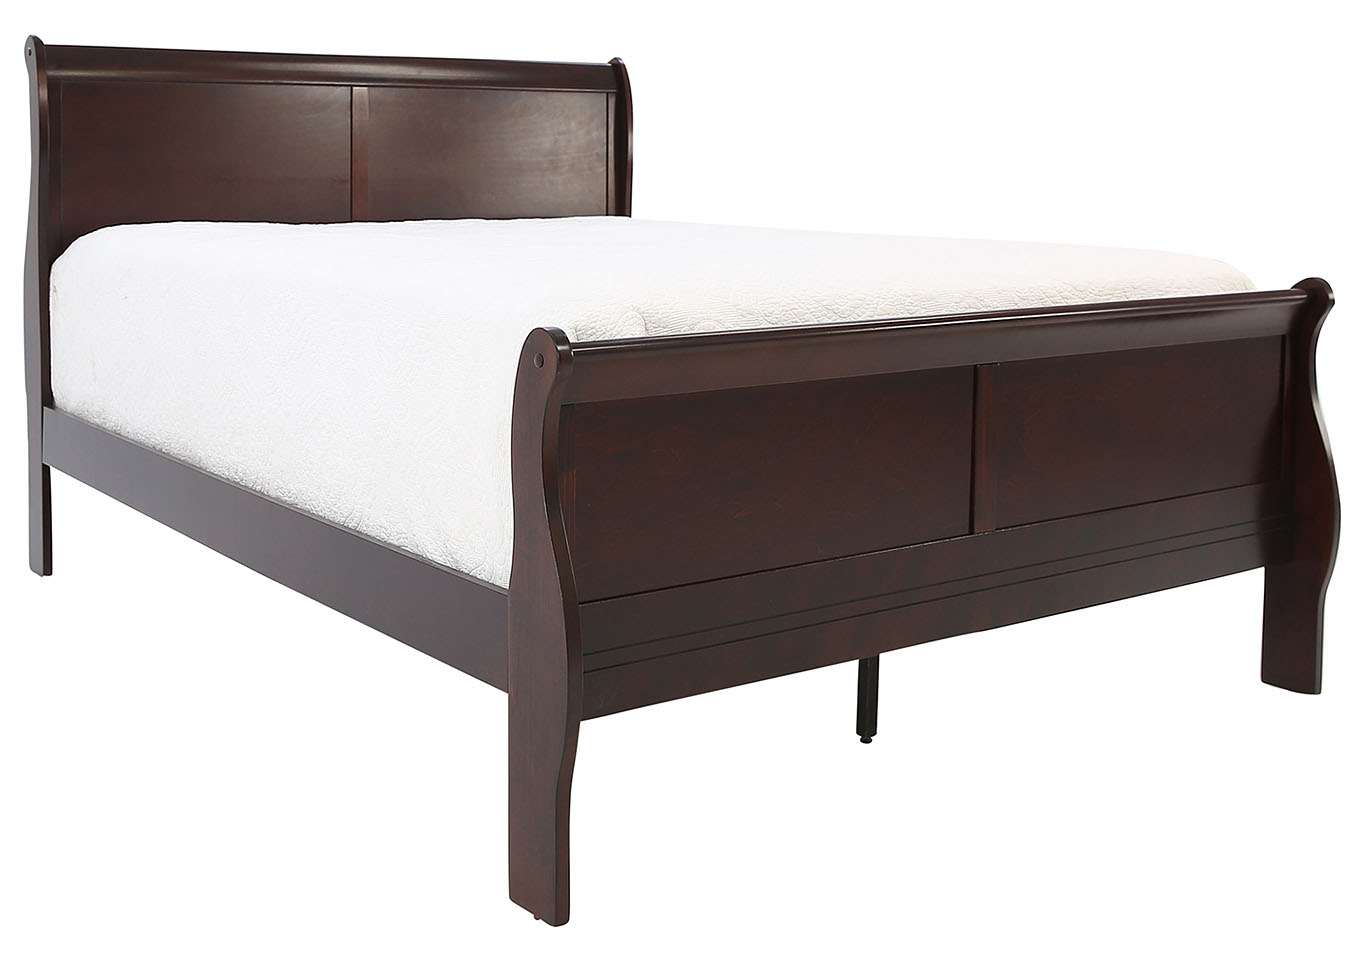  Louis Philippe Cherry Bedroom Set King and Queen Sizes